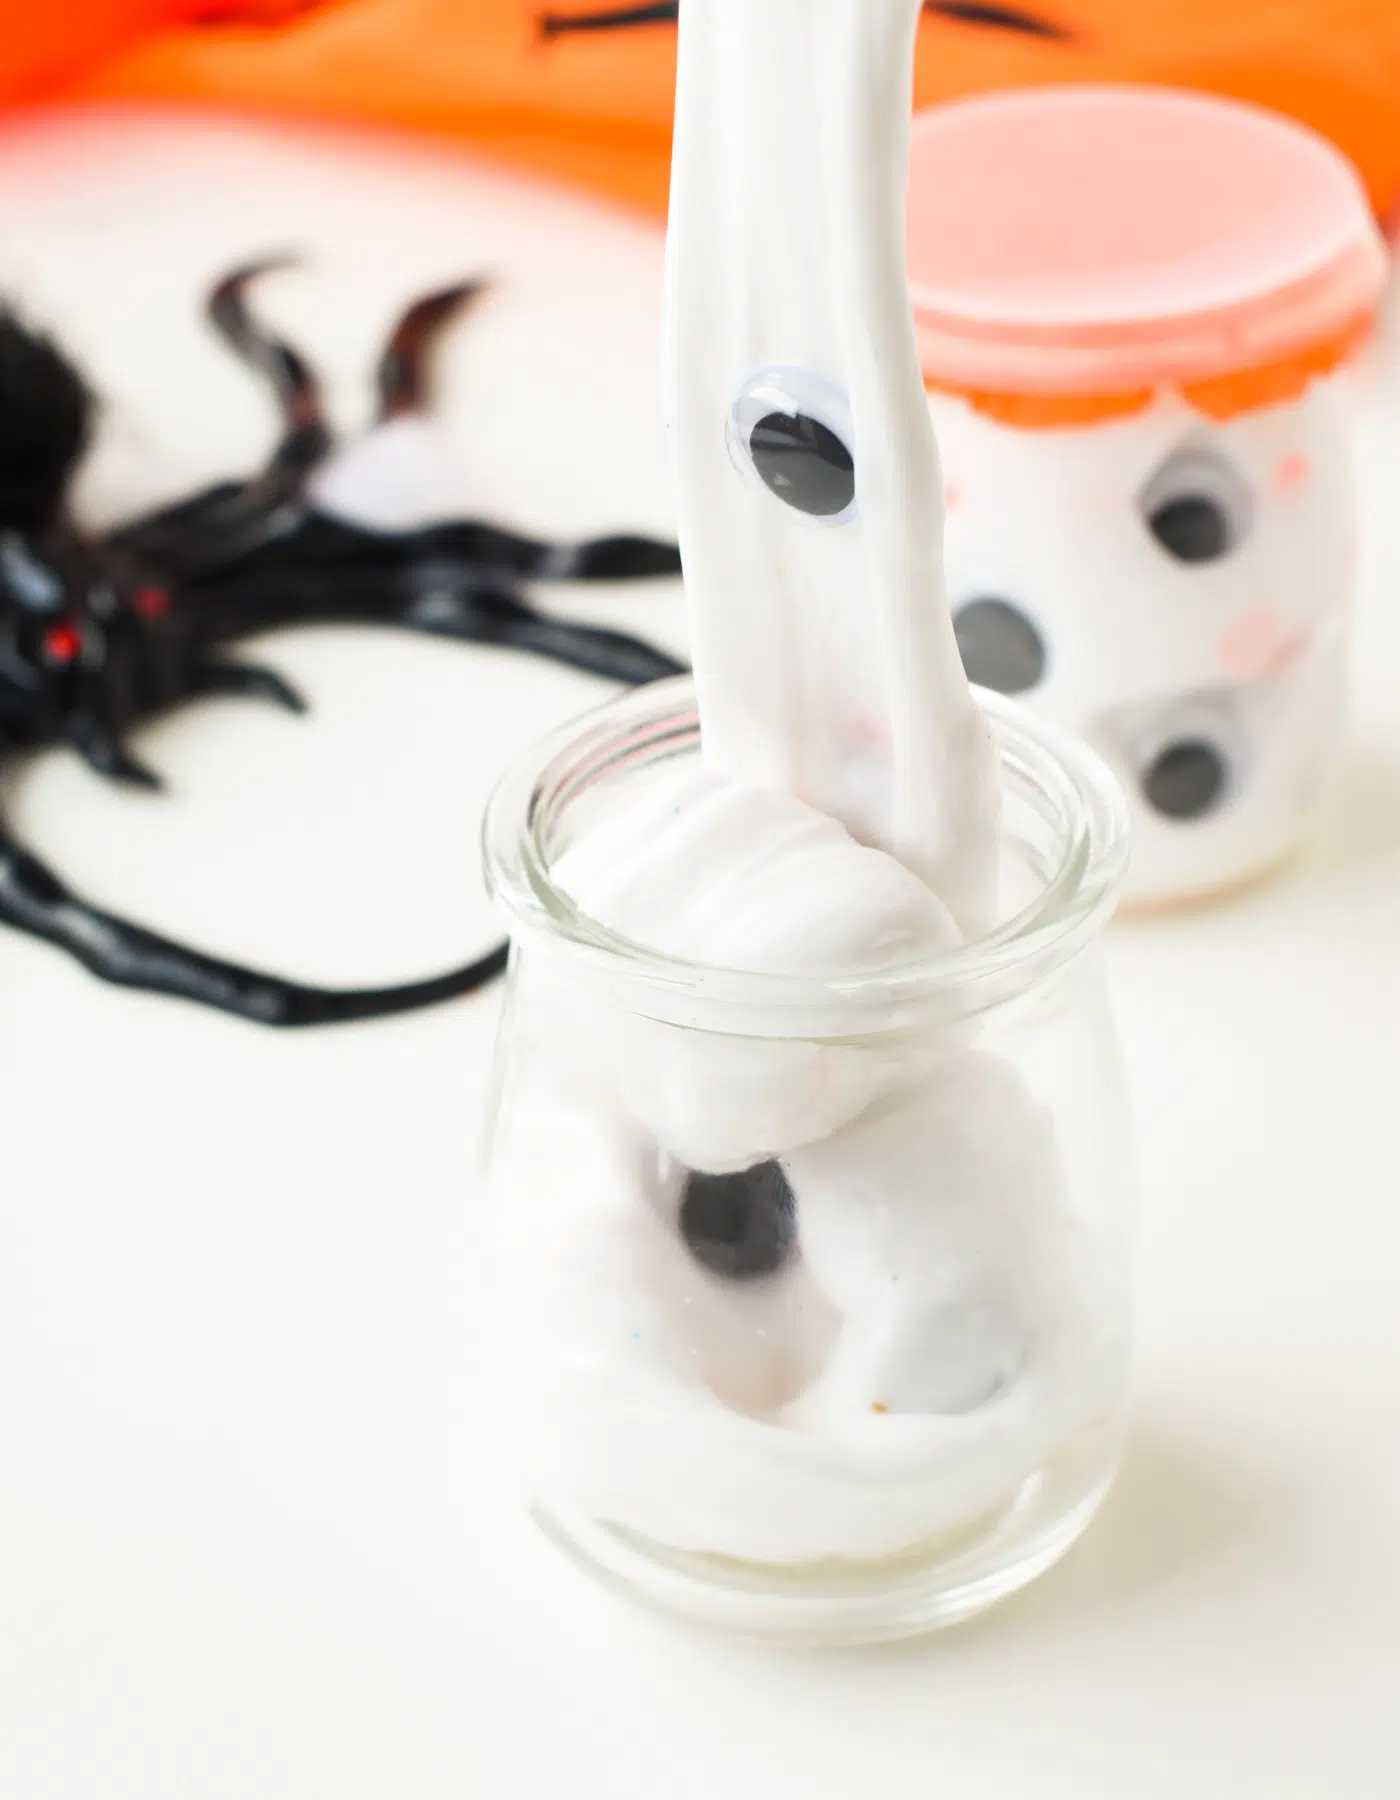 Slime Activator List for Making Your Own Slime Story - Little Bins